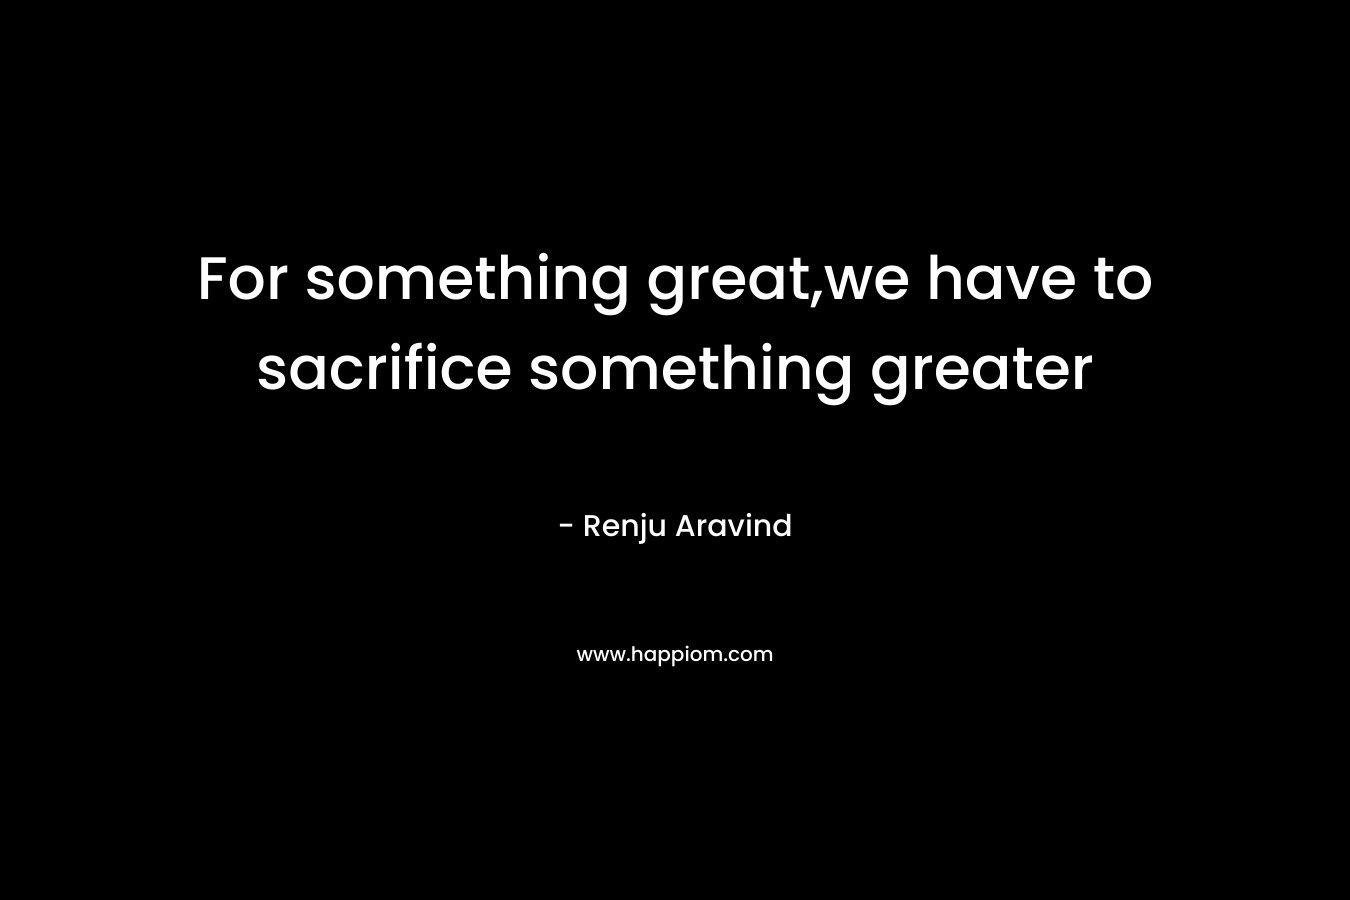 For something great,we have to sacrifice something greater